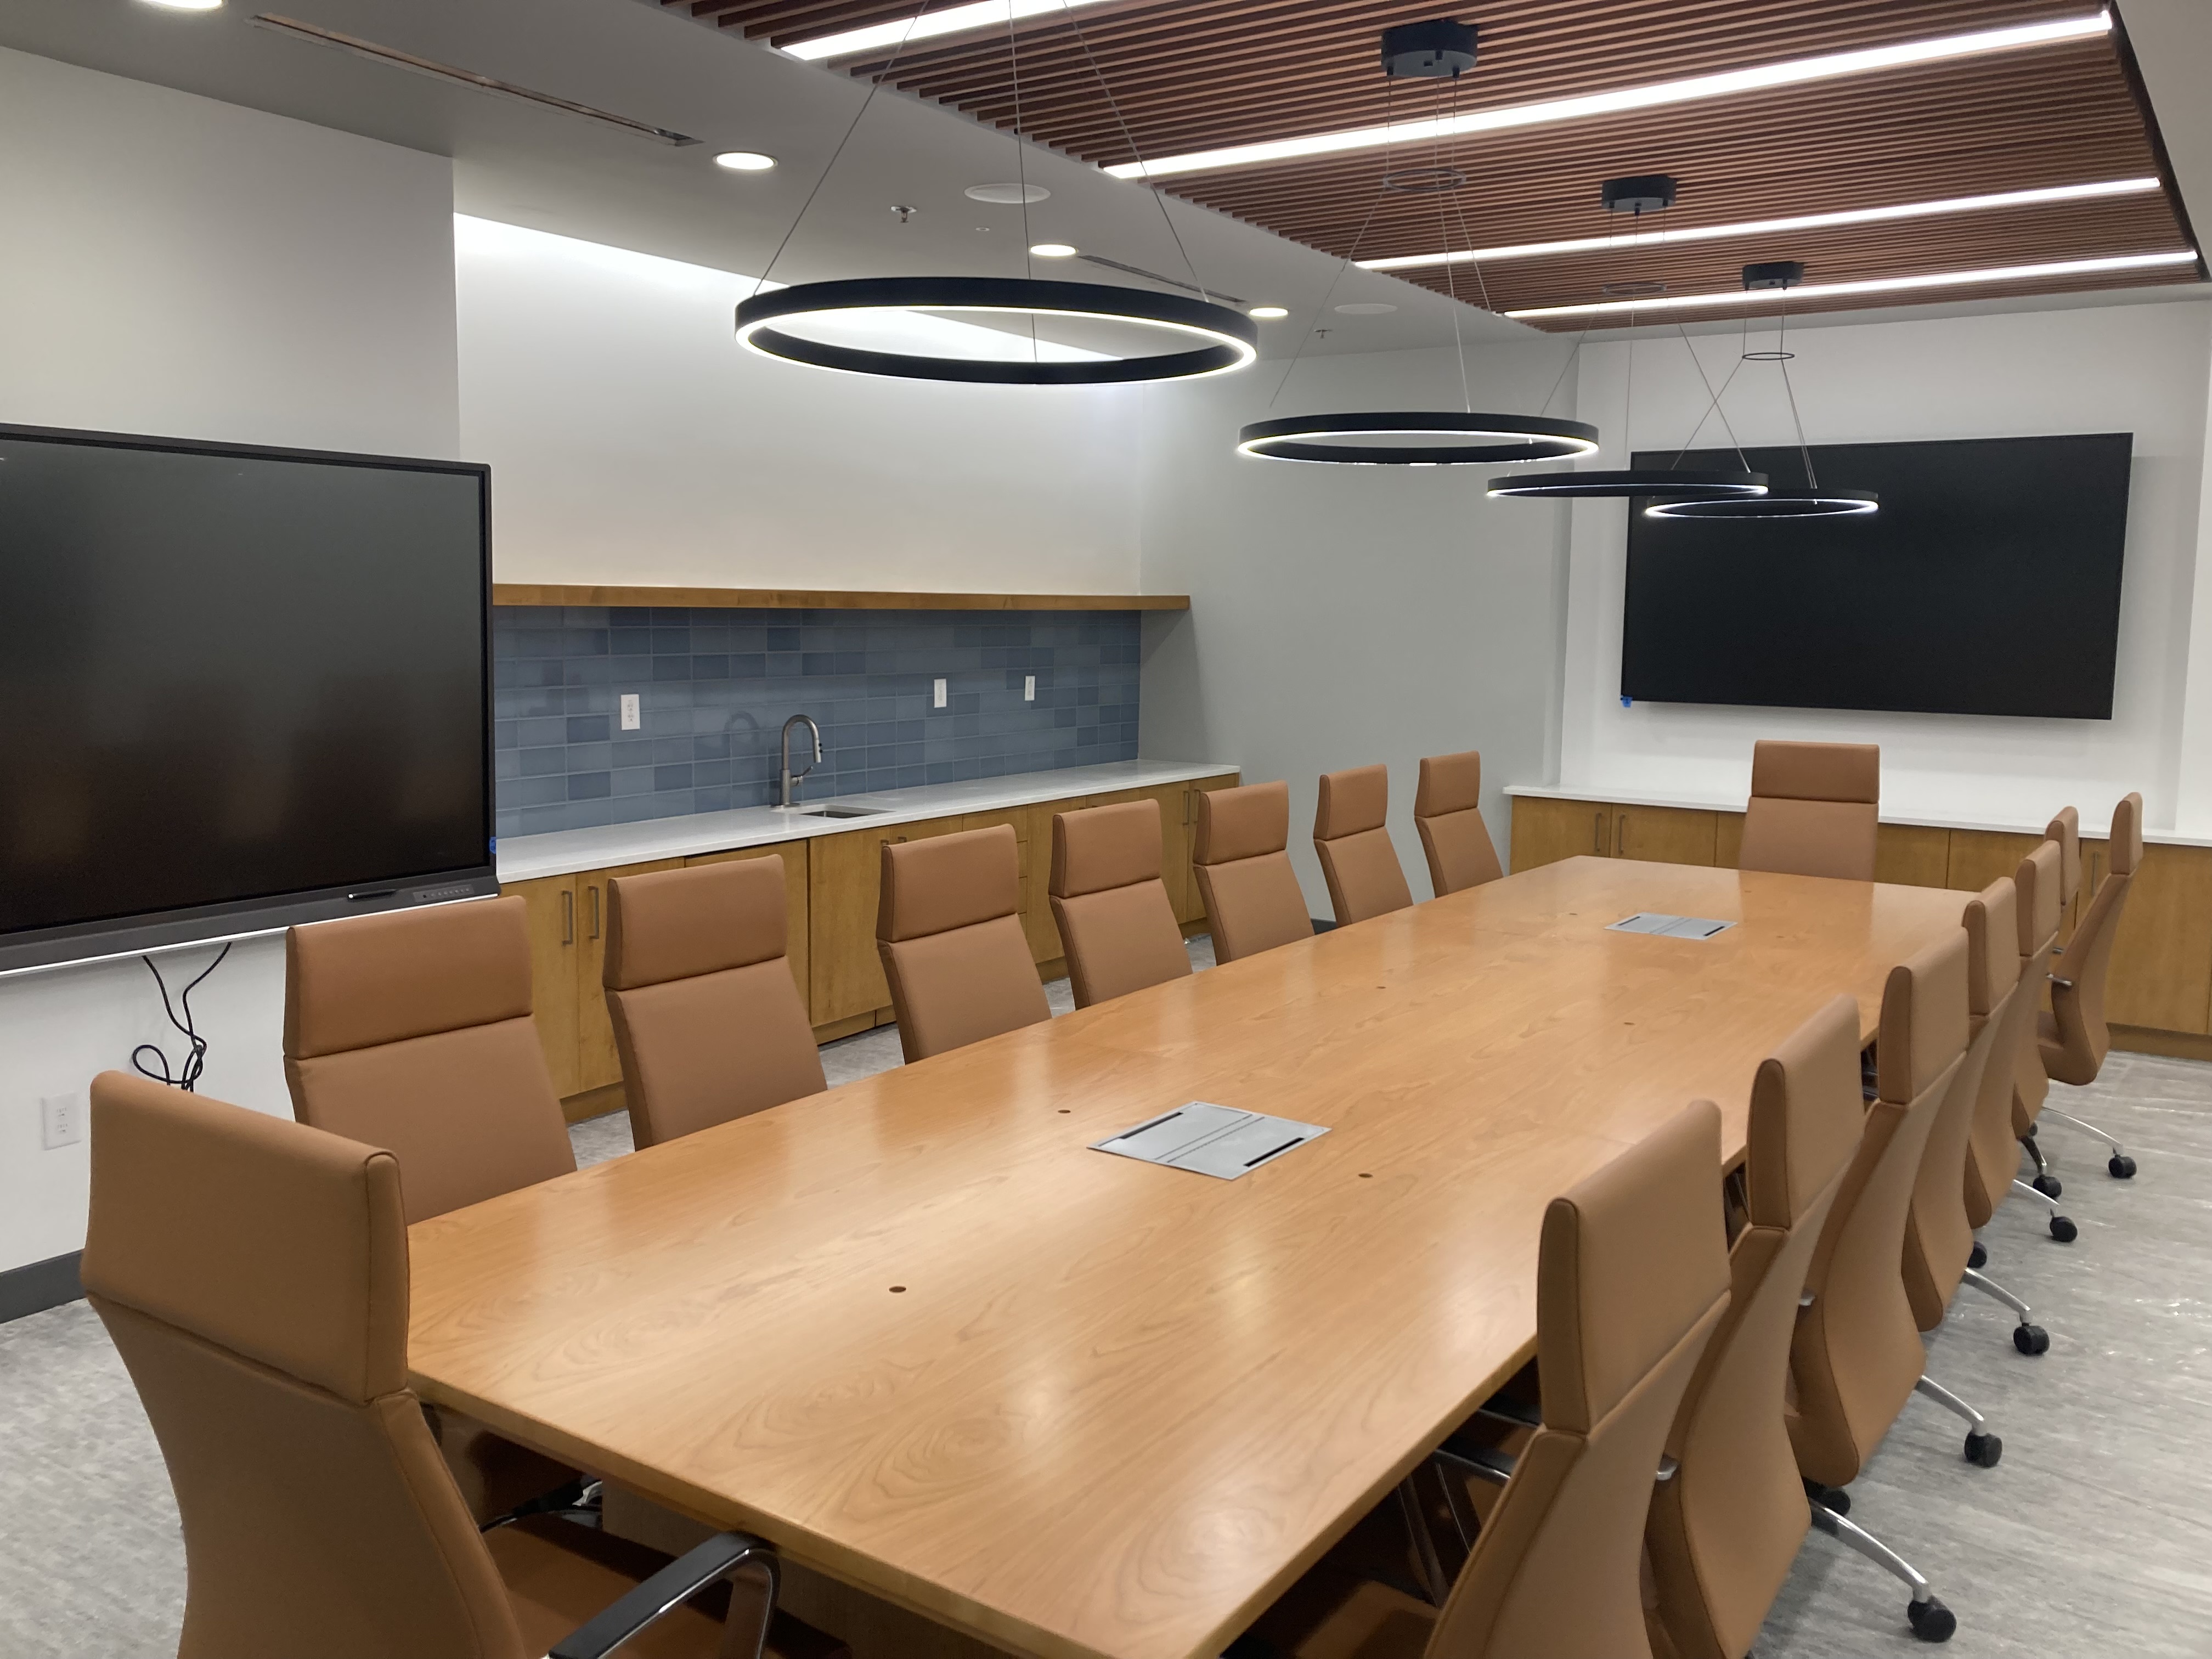 Completed conference room